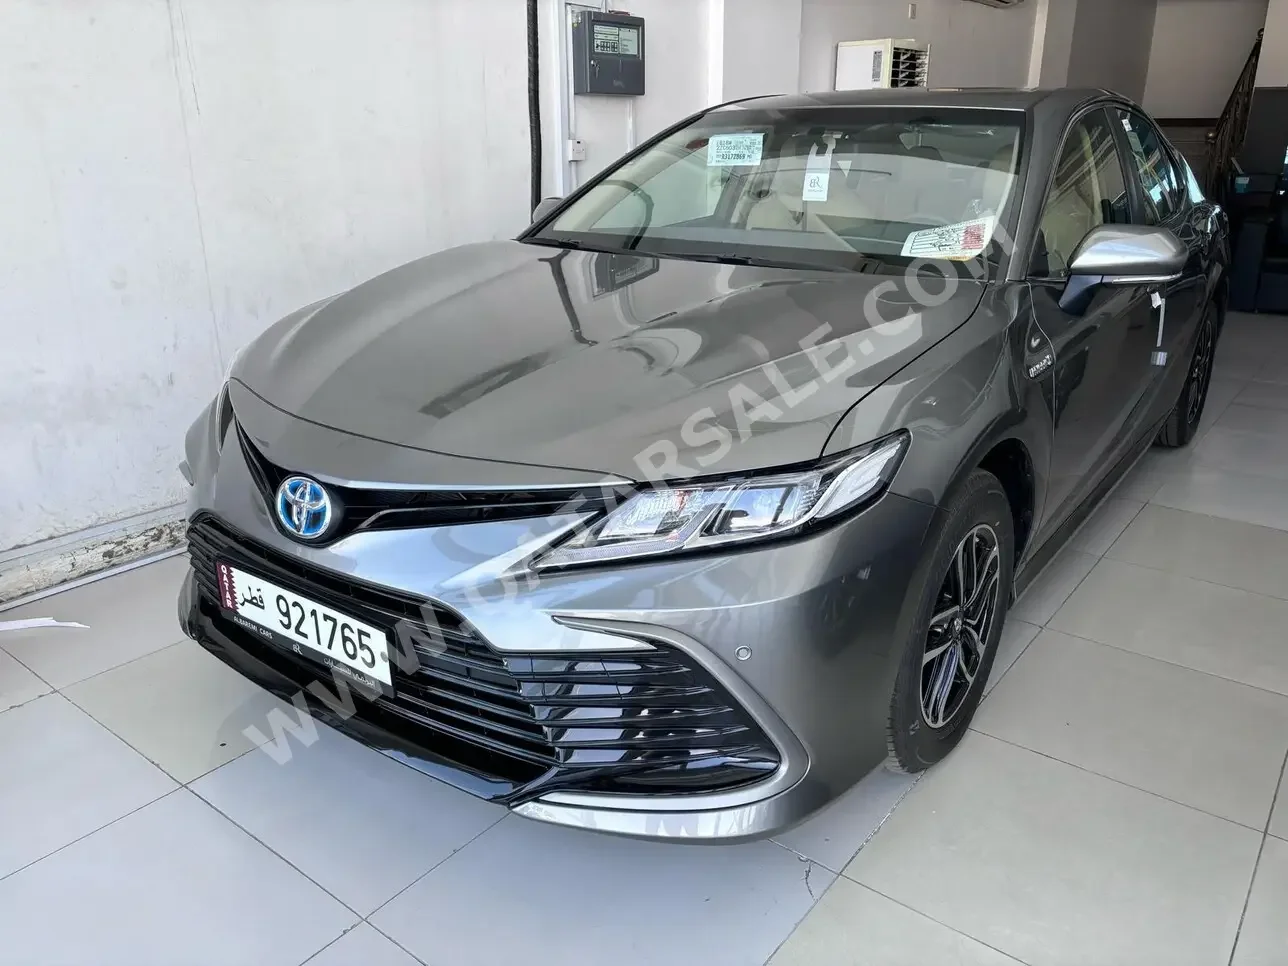 Toyota  Camry  LE  2024  Automatic  0 Km  4 Cylinder  Front Wheel Drive (FWD)  Sedan  Gray  With Warranty